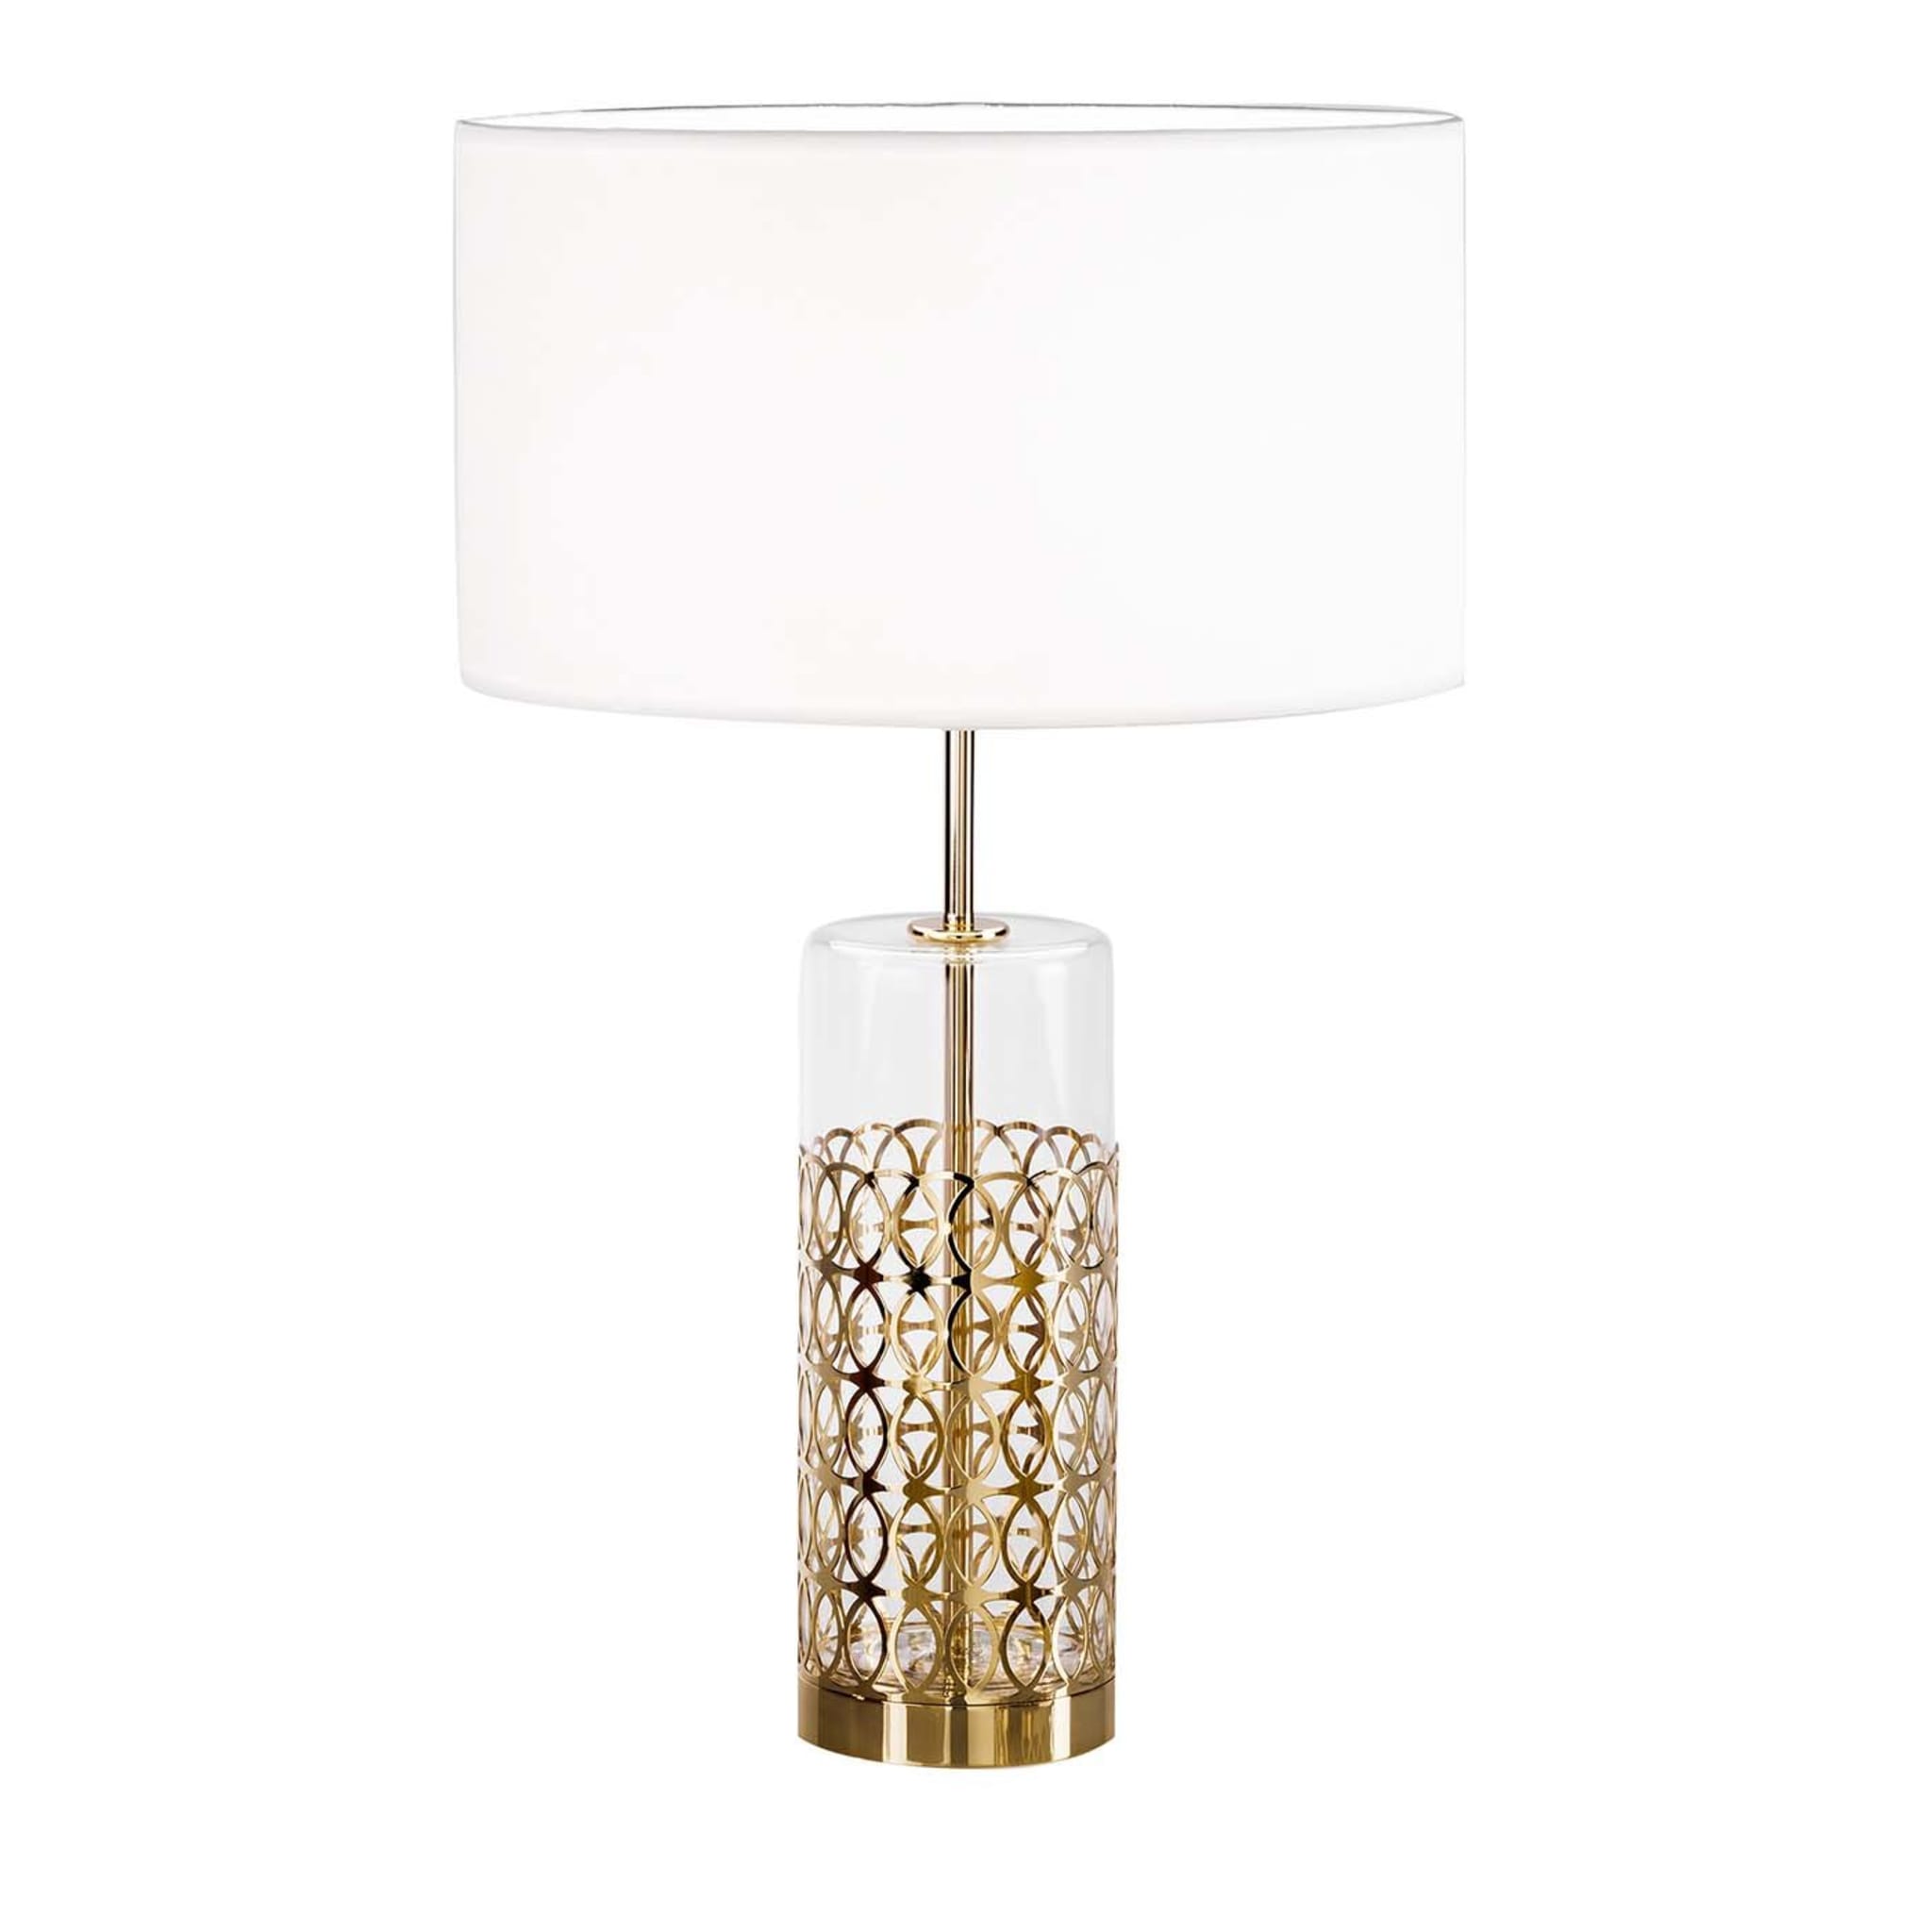 New York Golden Table Lamp - Main view